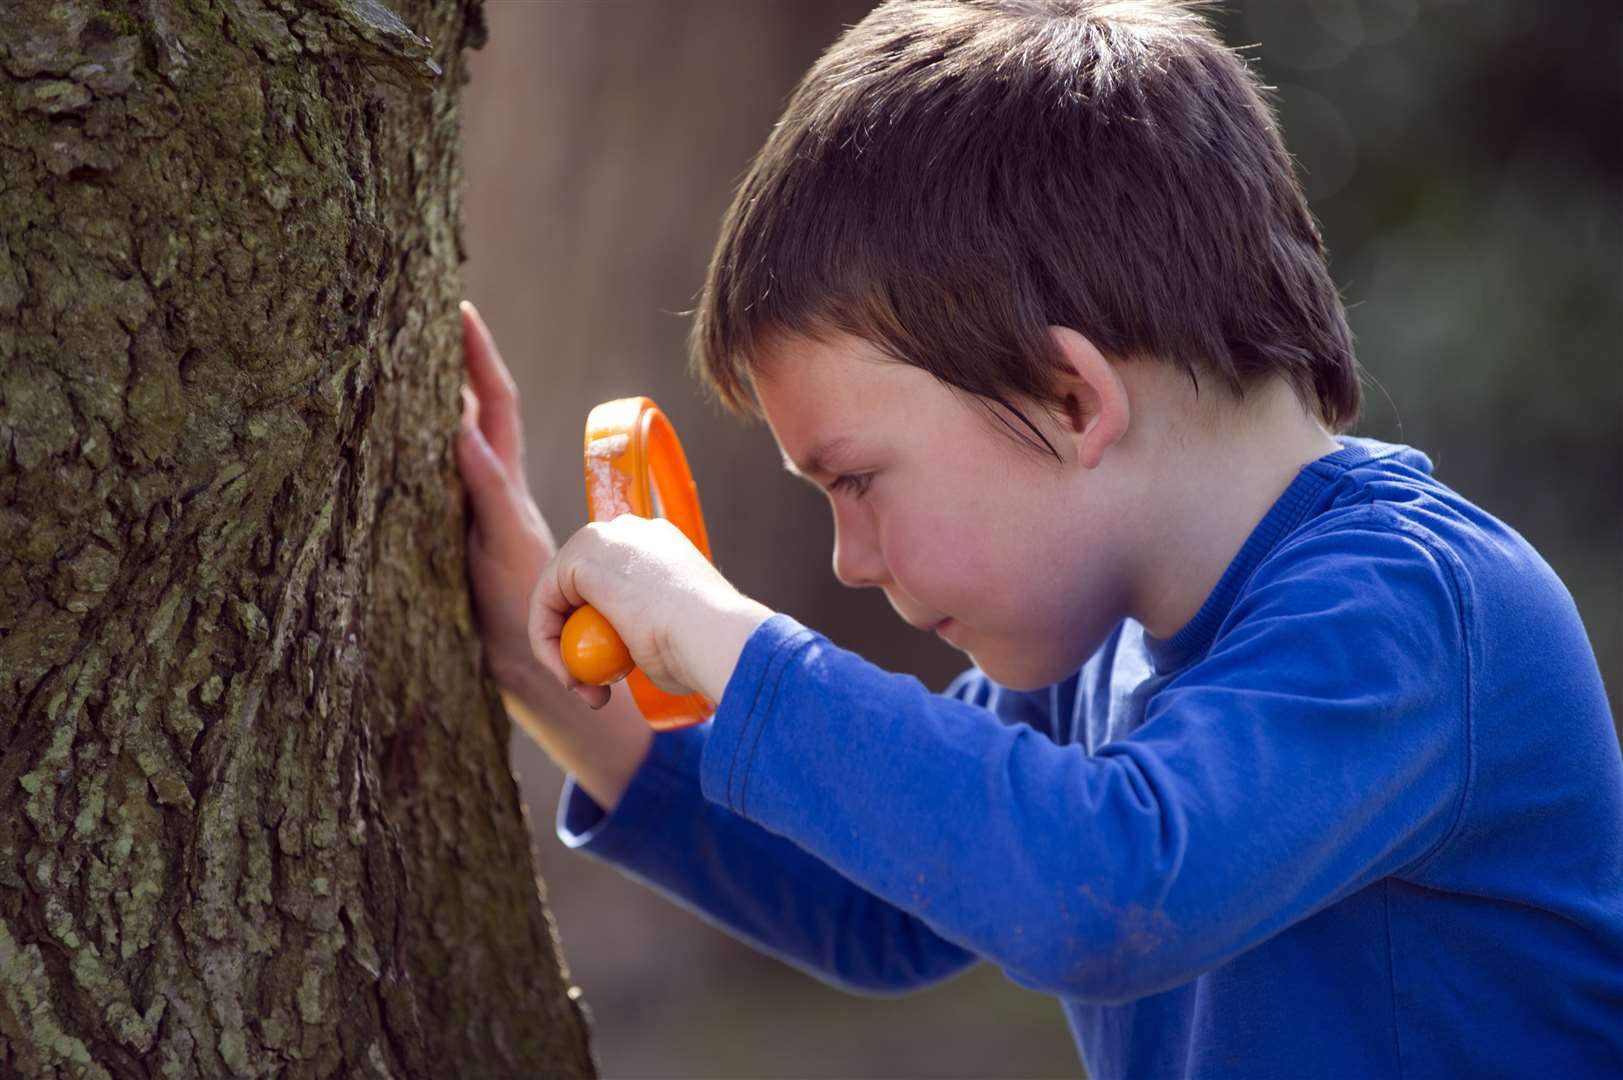 Playing outside or doing something fun can help ease worries and anxieties for families